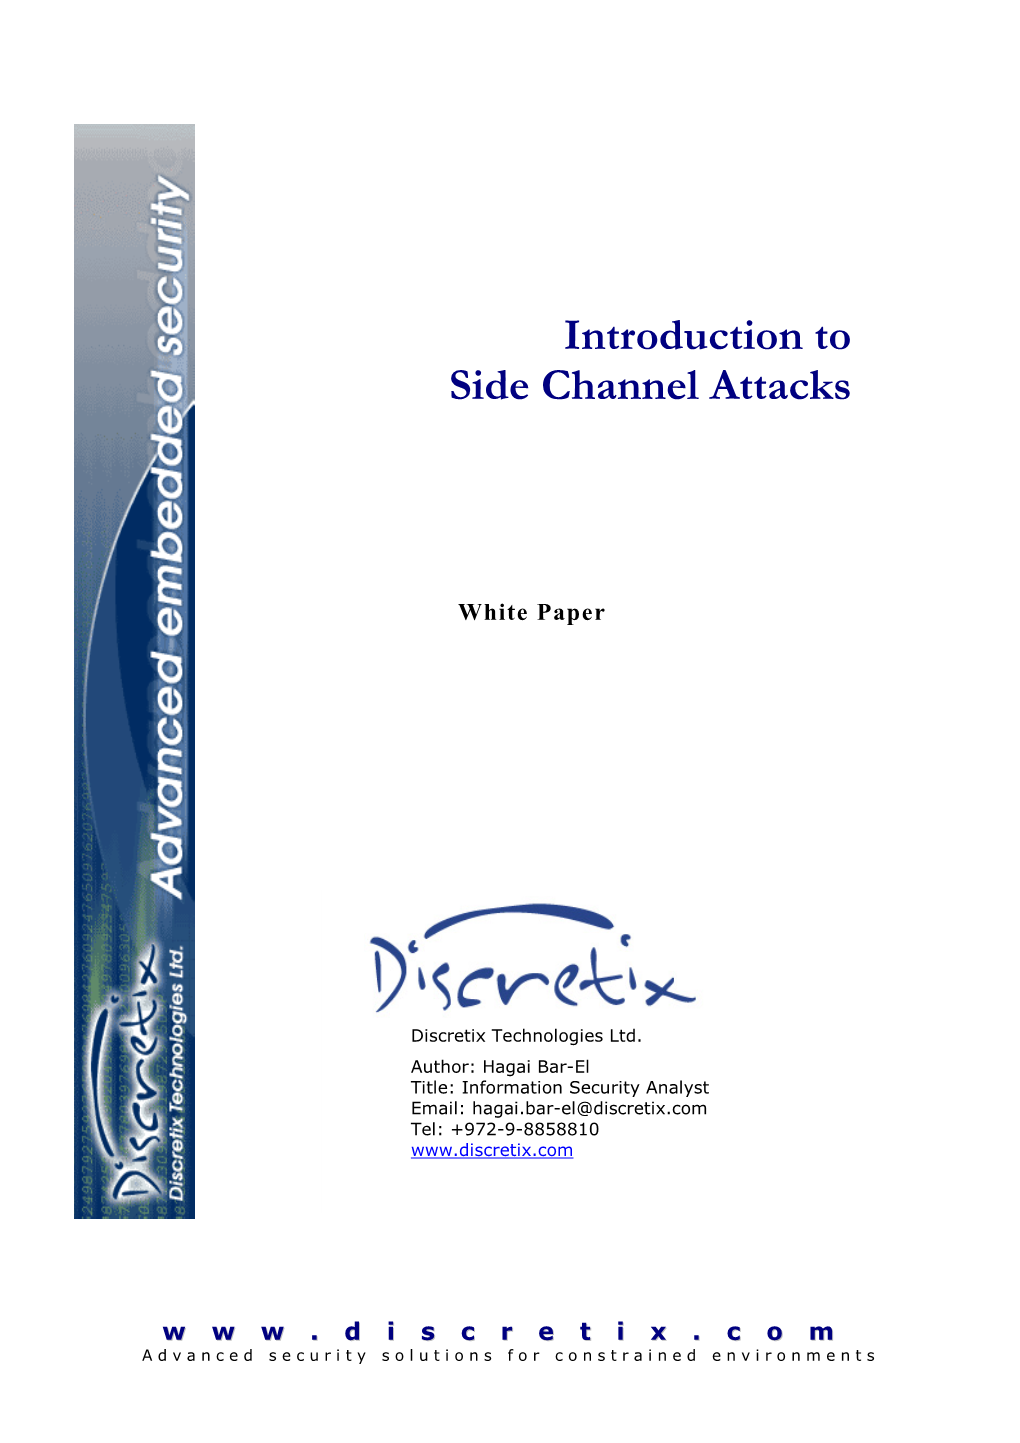 Introduction to Side Channel Attacks